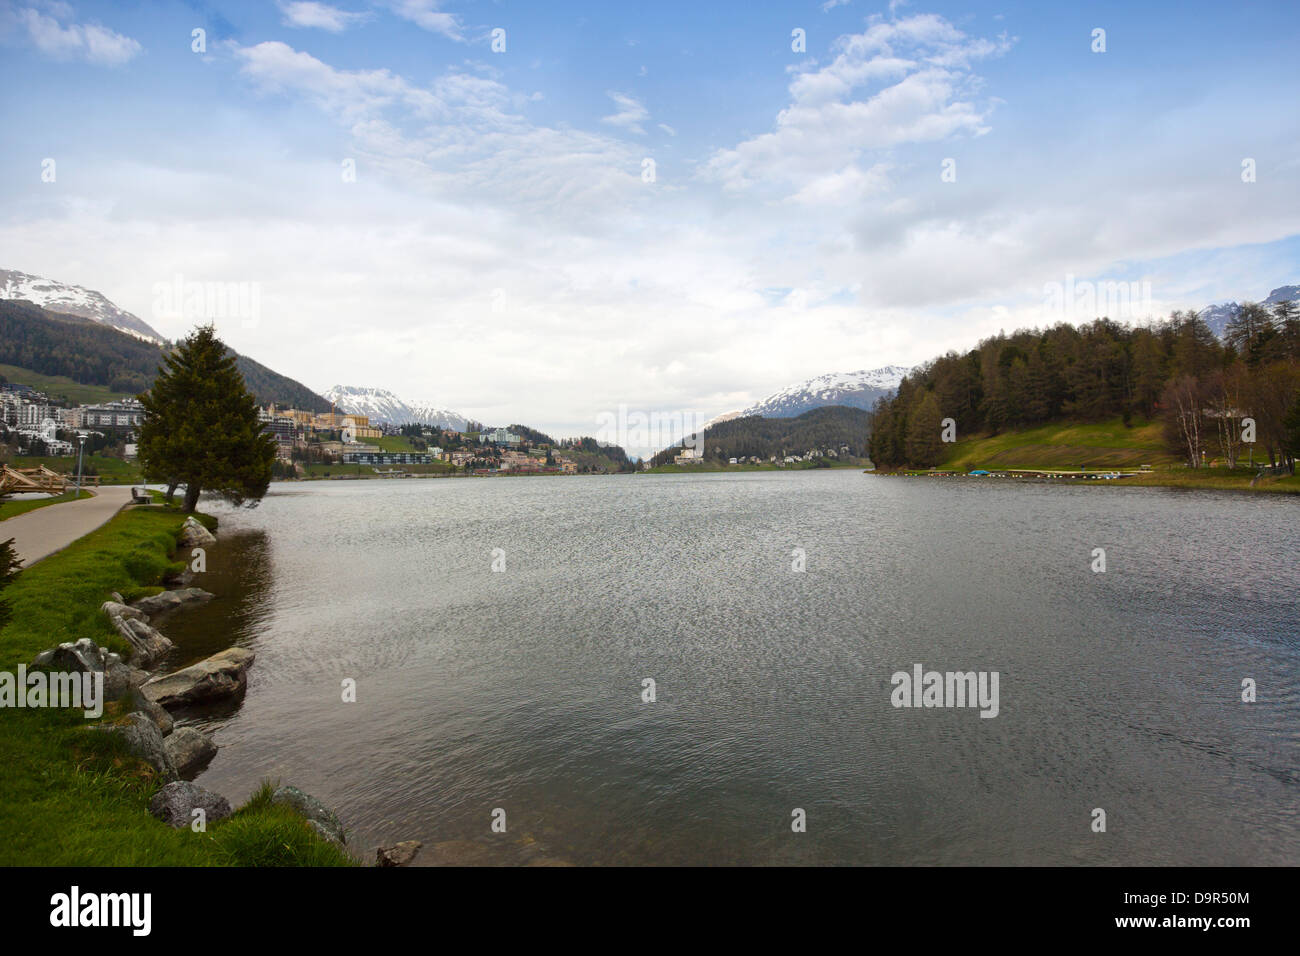 Lake with town in the background, St. Moritz, Italy Stock Photo